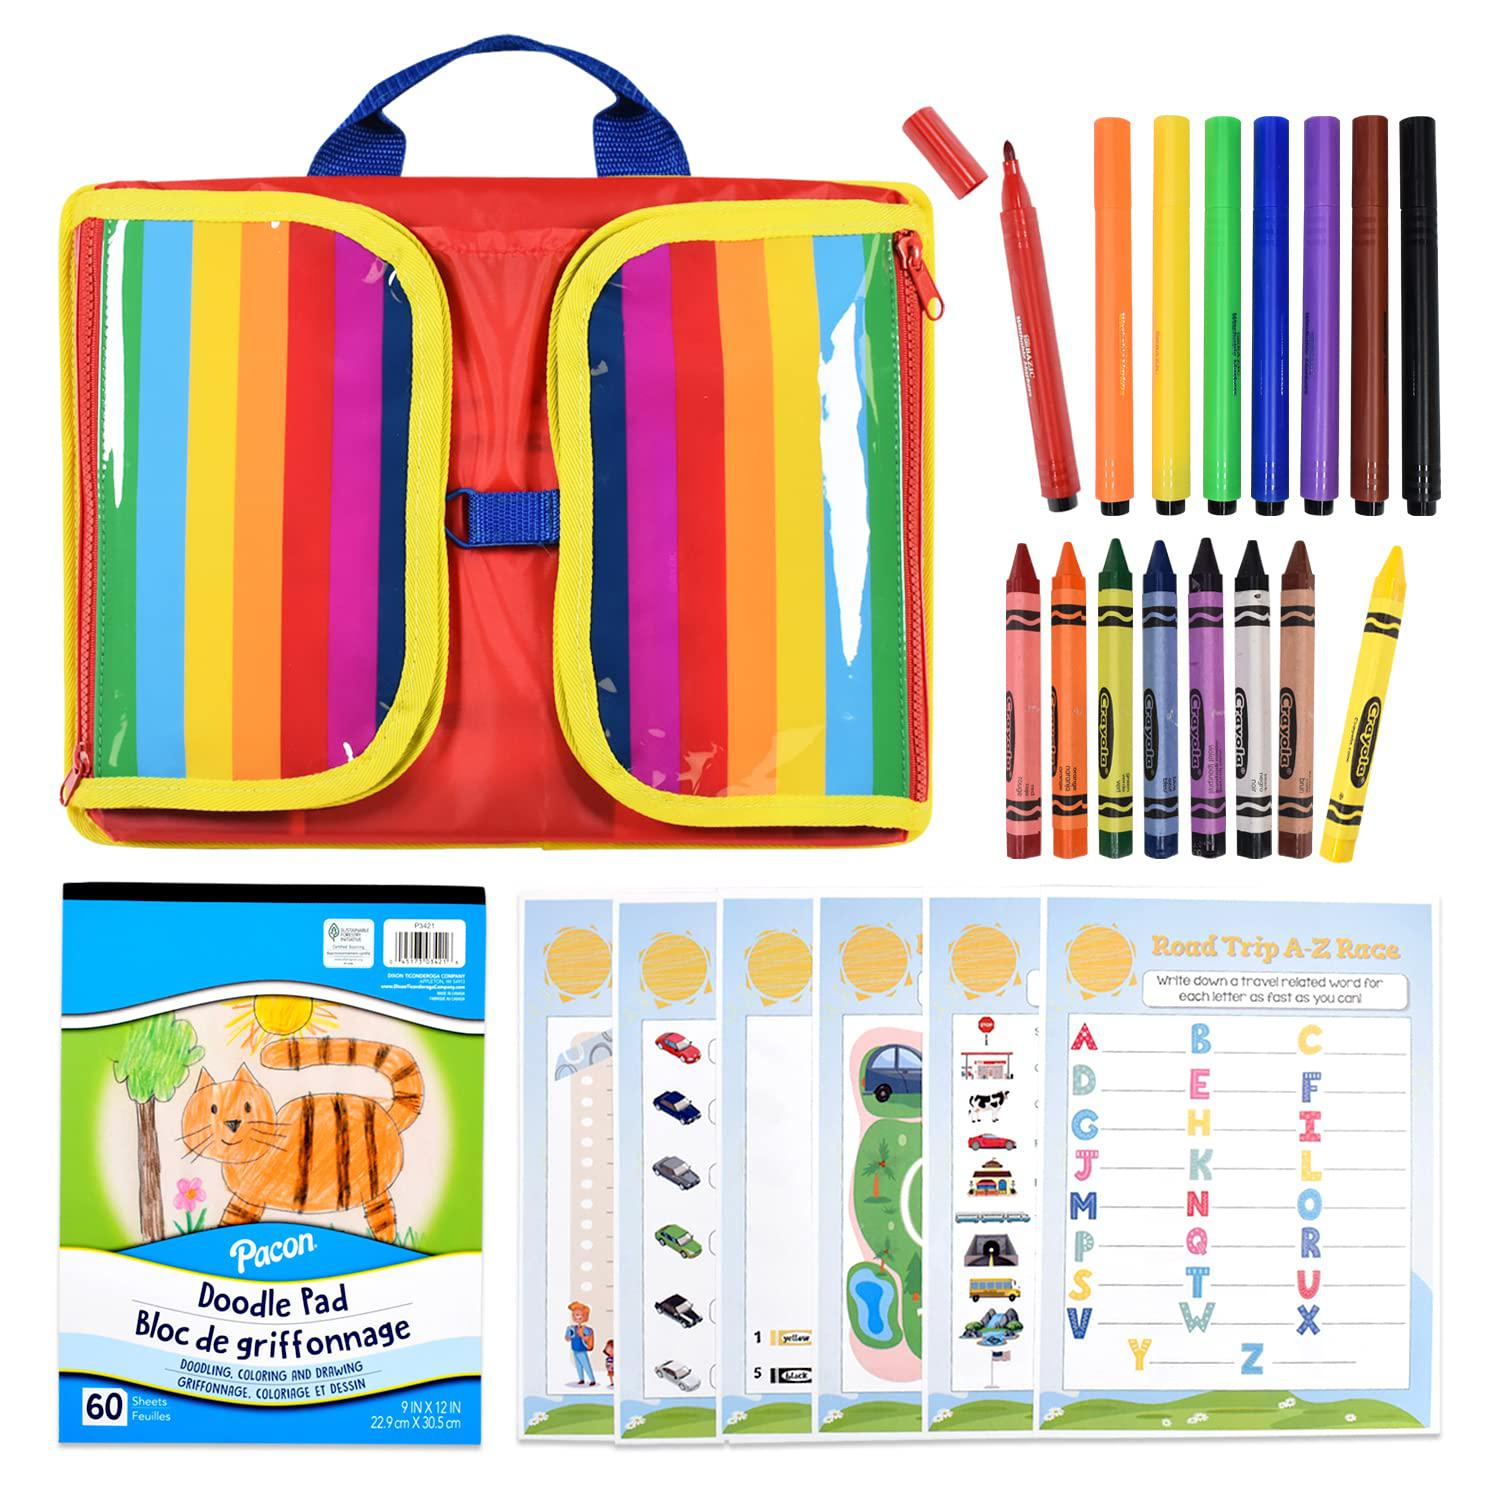 SWAGITLOUD travel activity kit with lap tray - kids lap desk with art supplies & games - portable car coloring kit - airplane & roadtrip